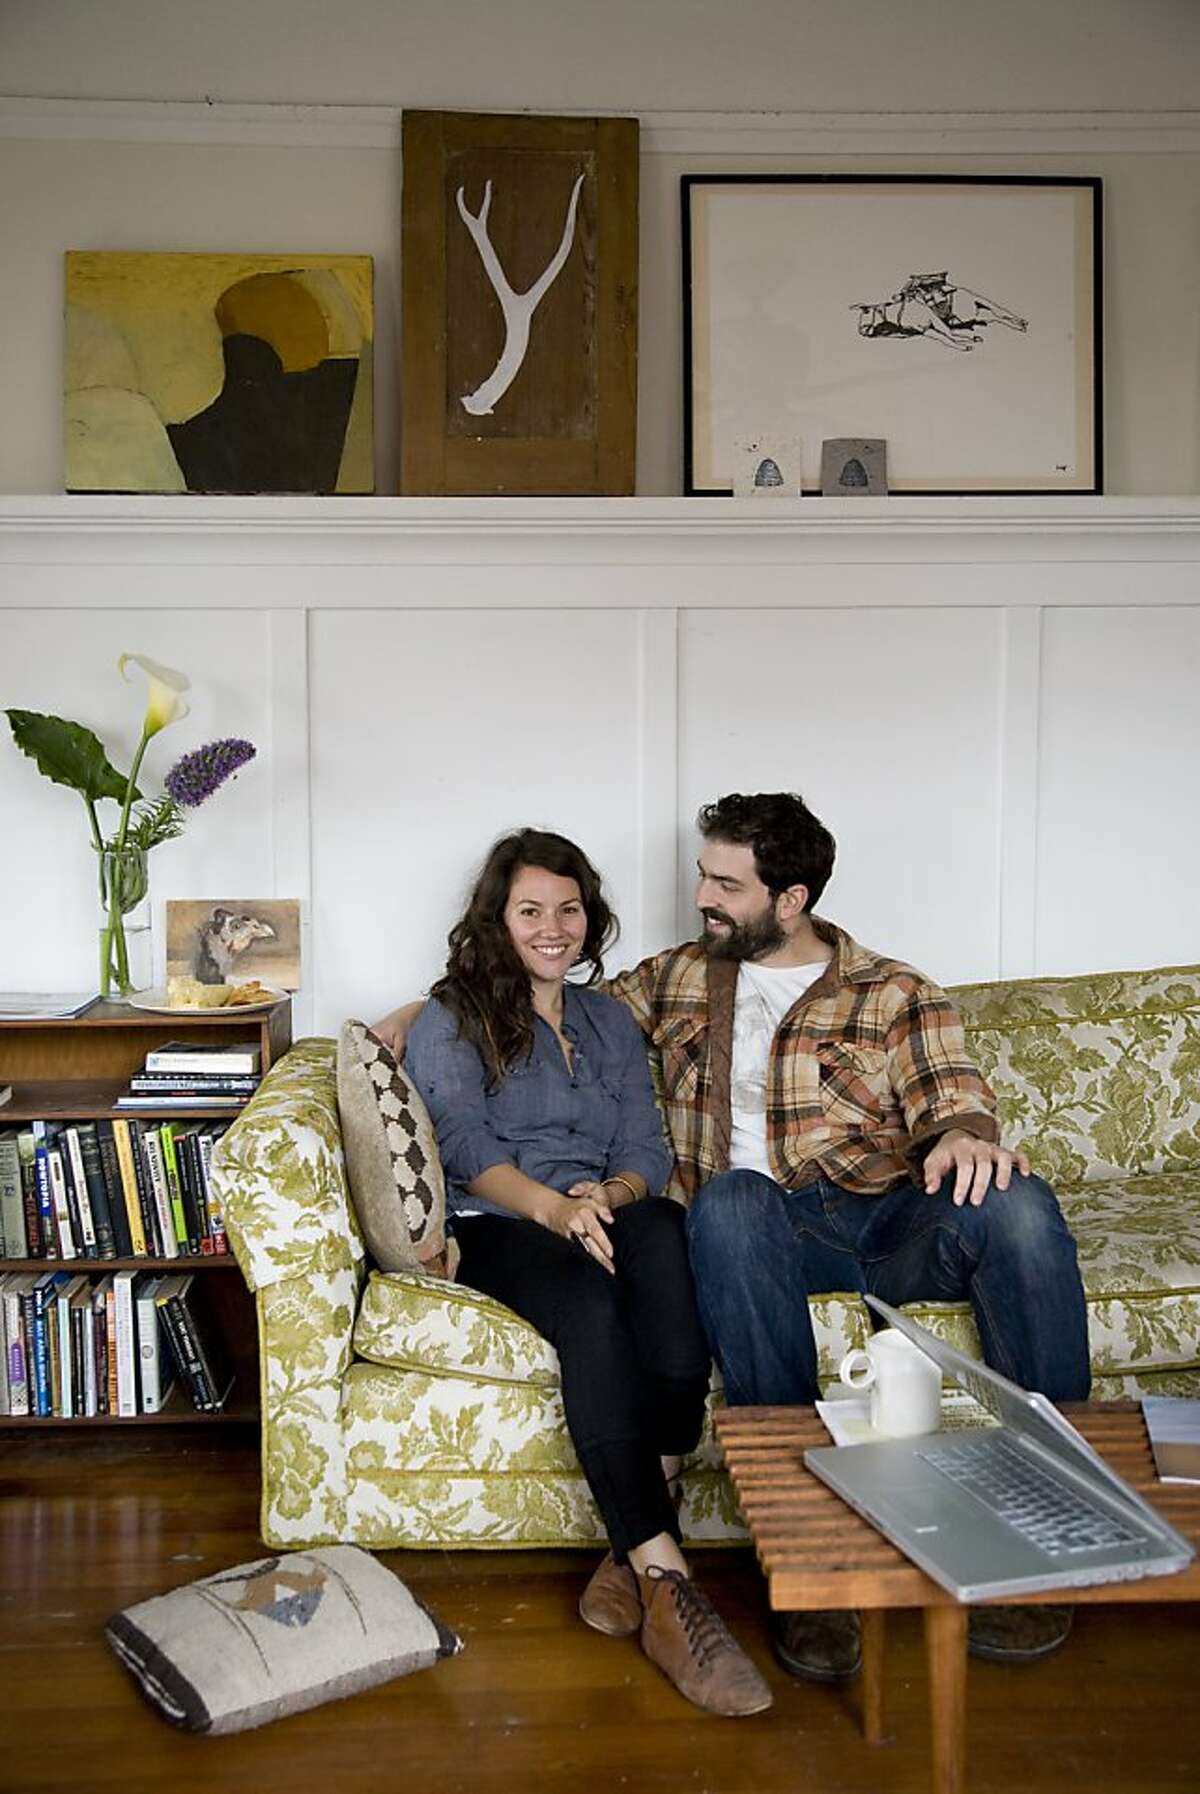 Artist and ceramicist Jessica Niello and chef Sam White sit in the living room of their homespun West Oakland retreat.